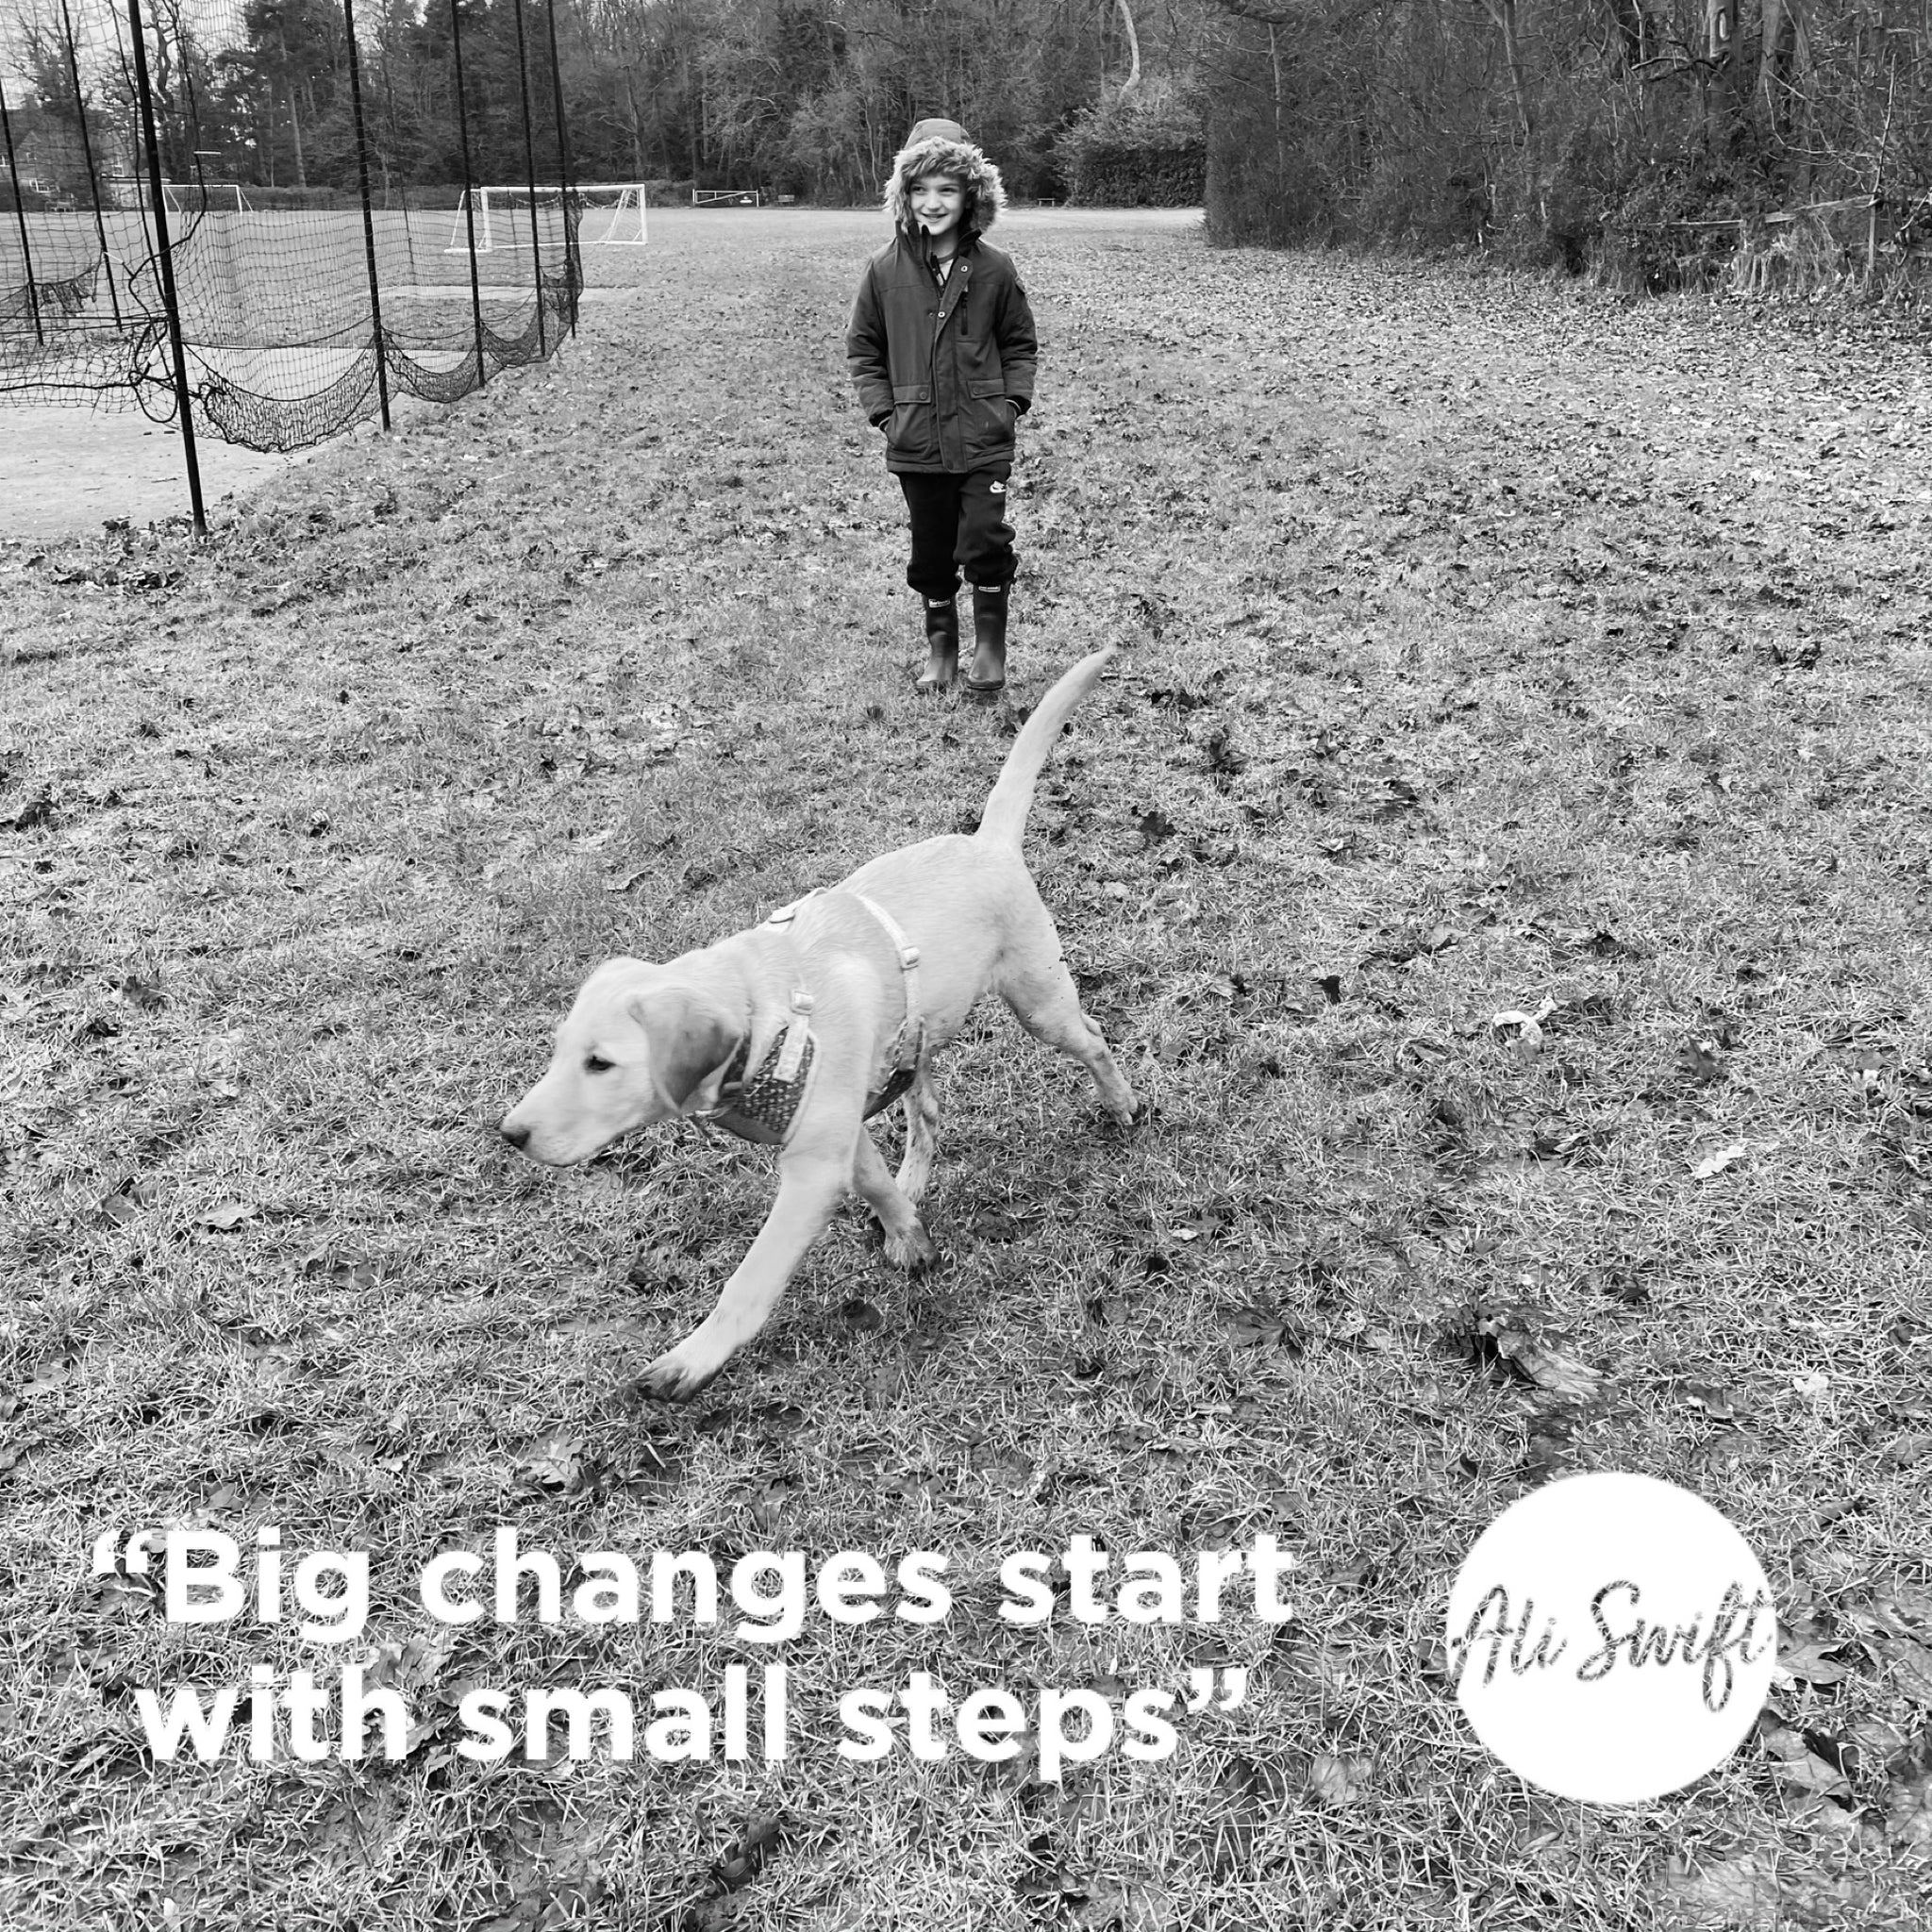 WHAT SMALL STEPS CAN YOU MAKE TOWARDS A BIG CHANGE?